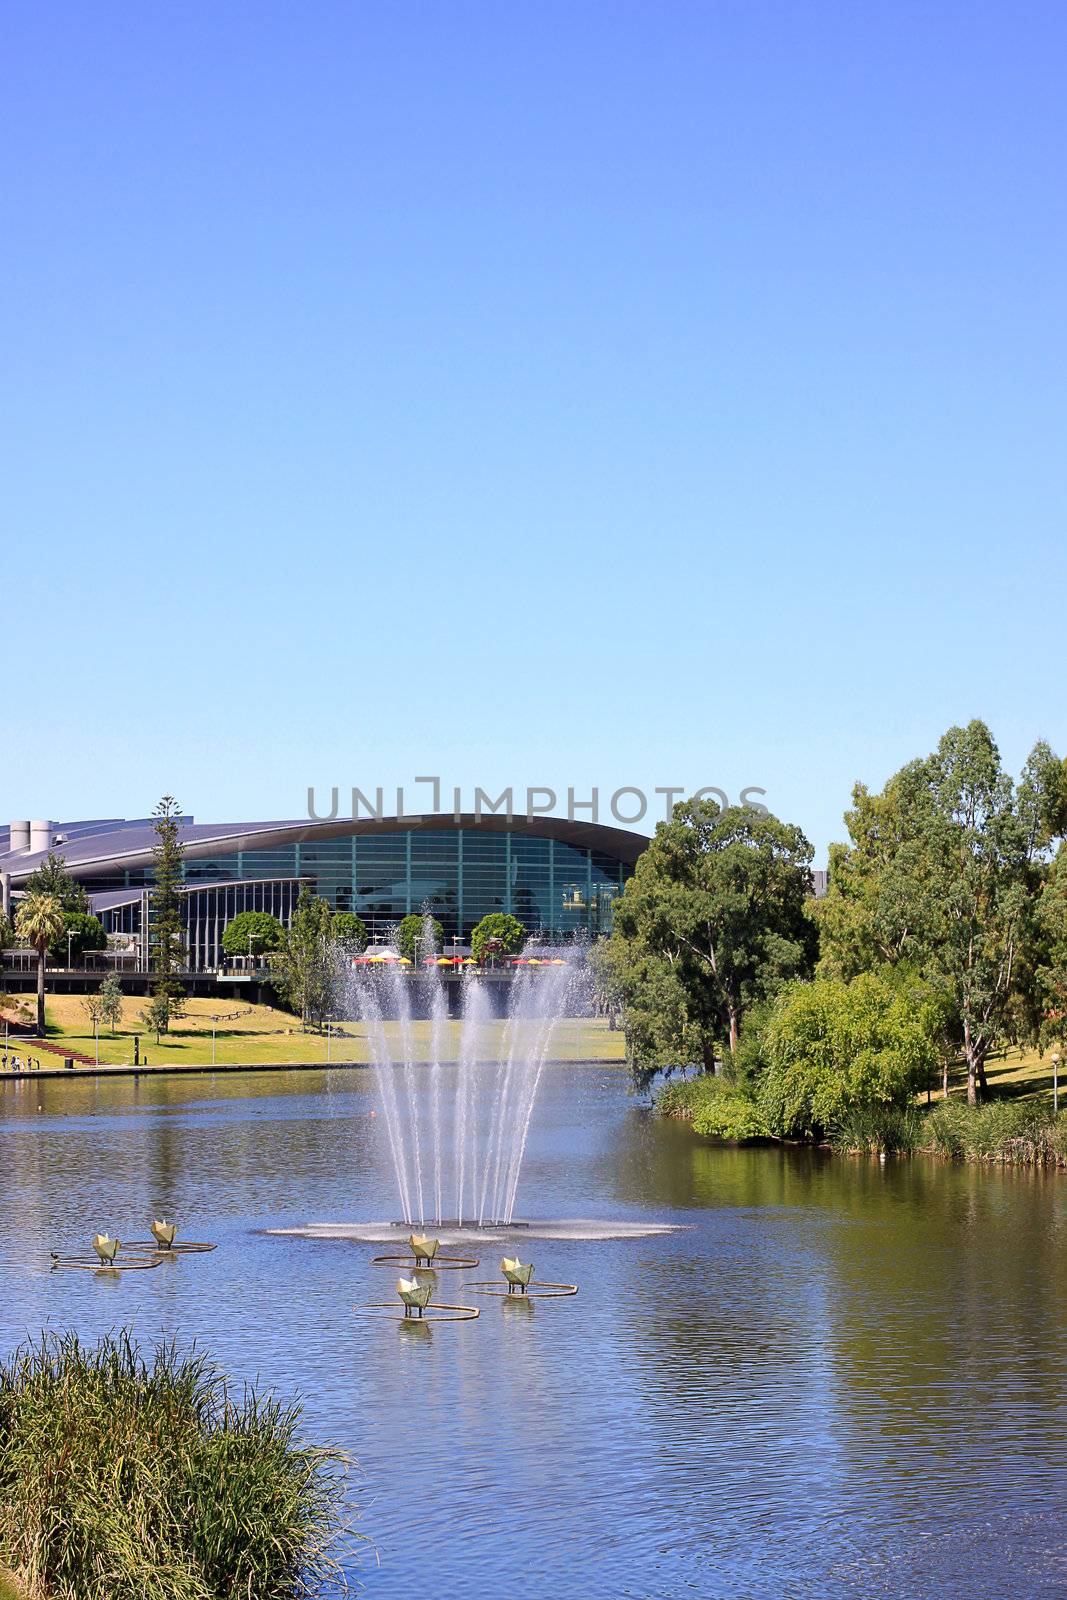 Adelaide Convention Centre along the banks of the River Torrens Lake, with a water fountain and 'paper boats' sculpture in the foreground.  Adelaide, Australia